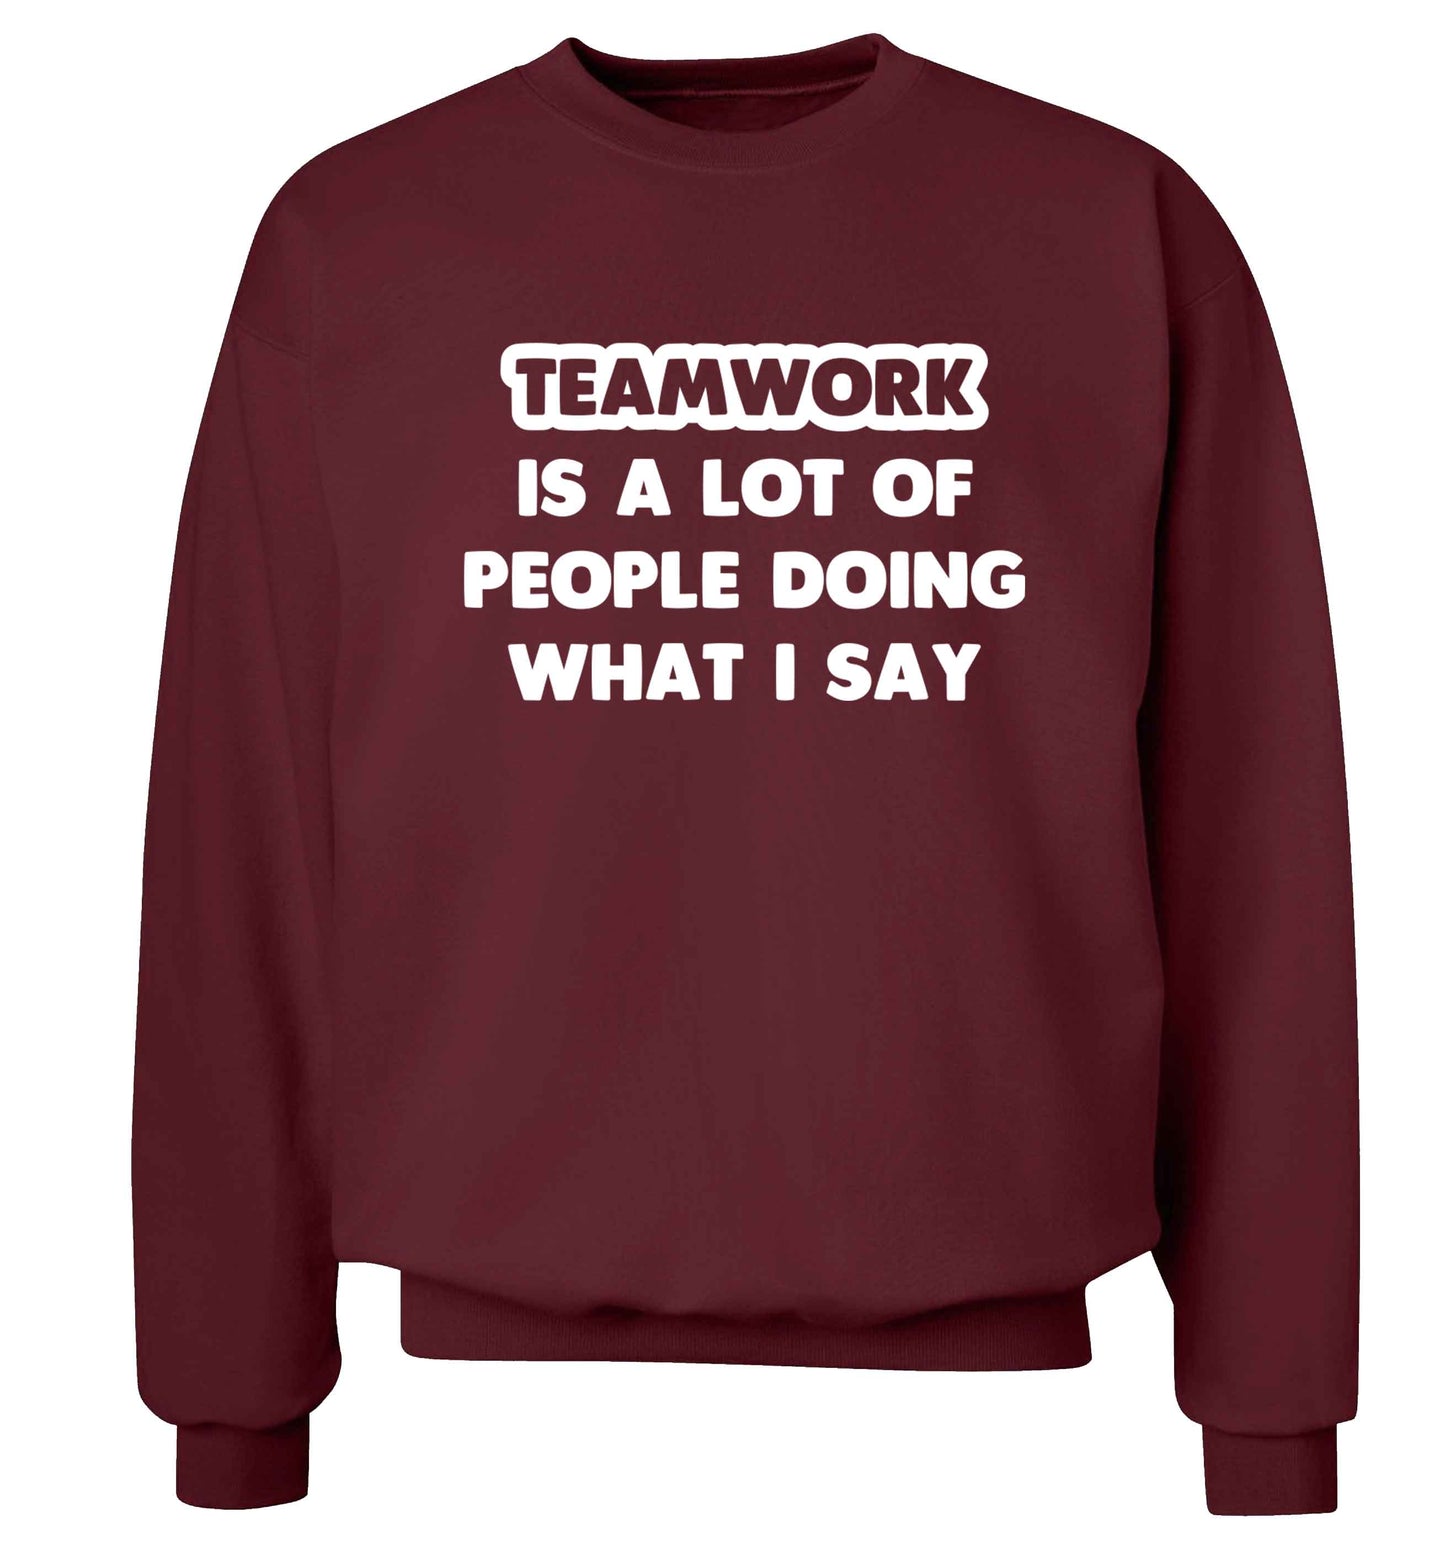 Teamwork is a lot of people doing what I say Adult's unisex maroon Sweater 2XL